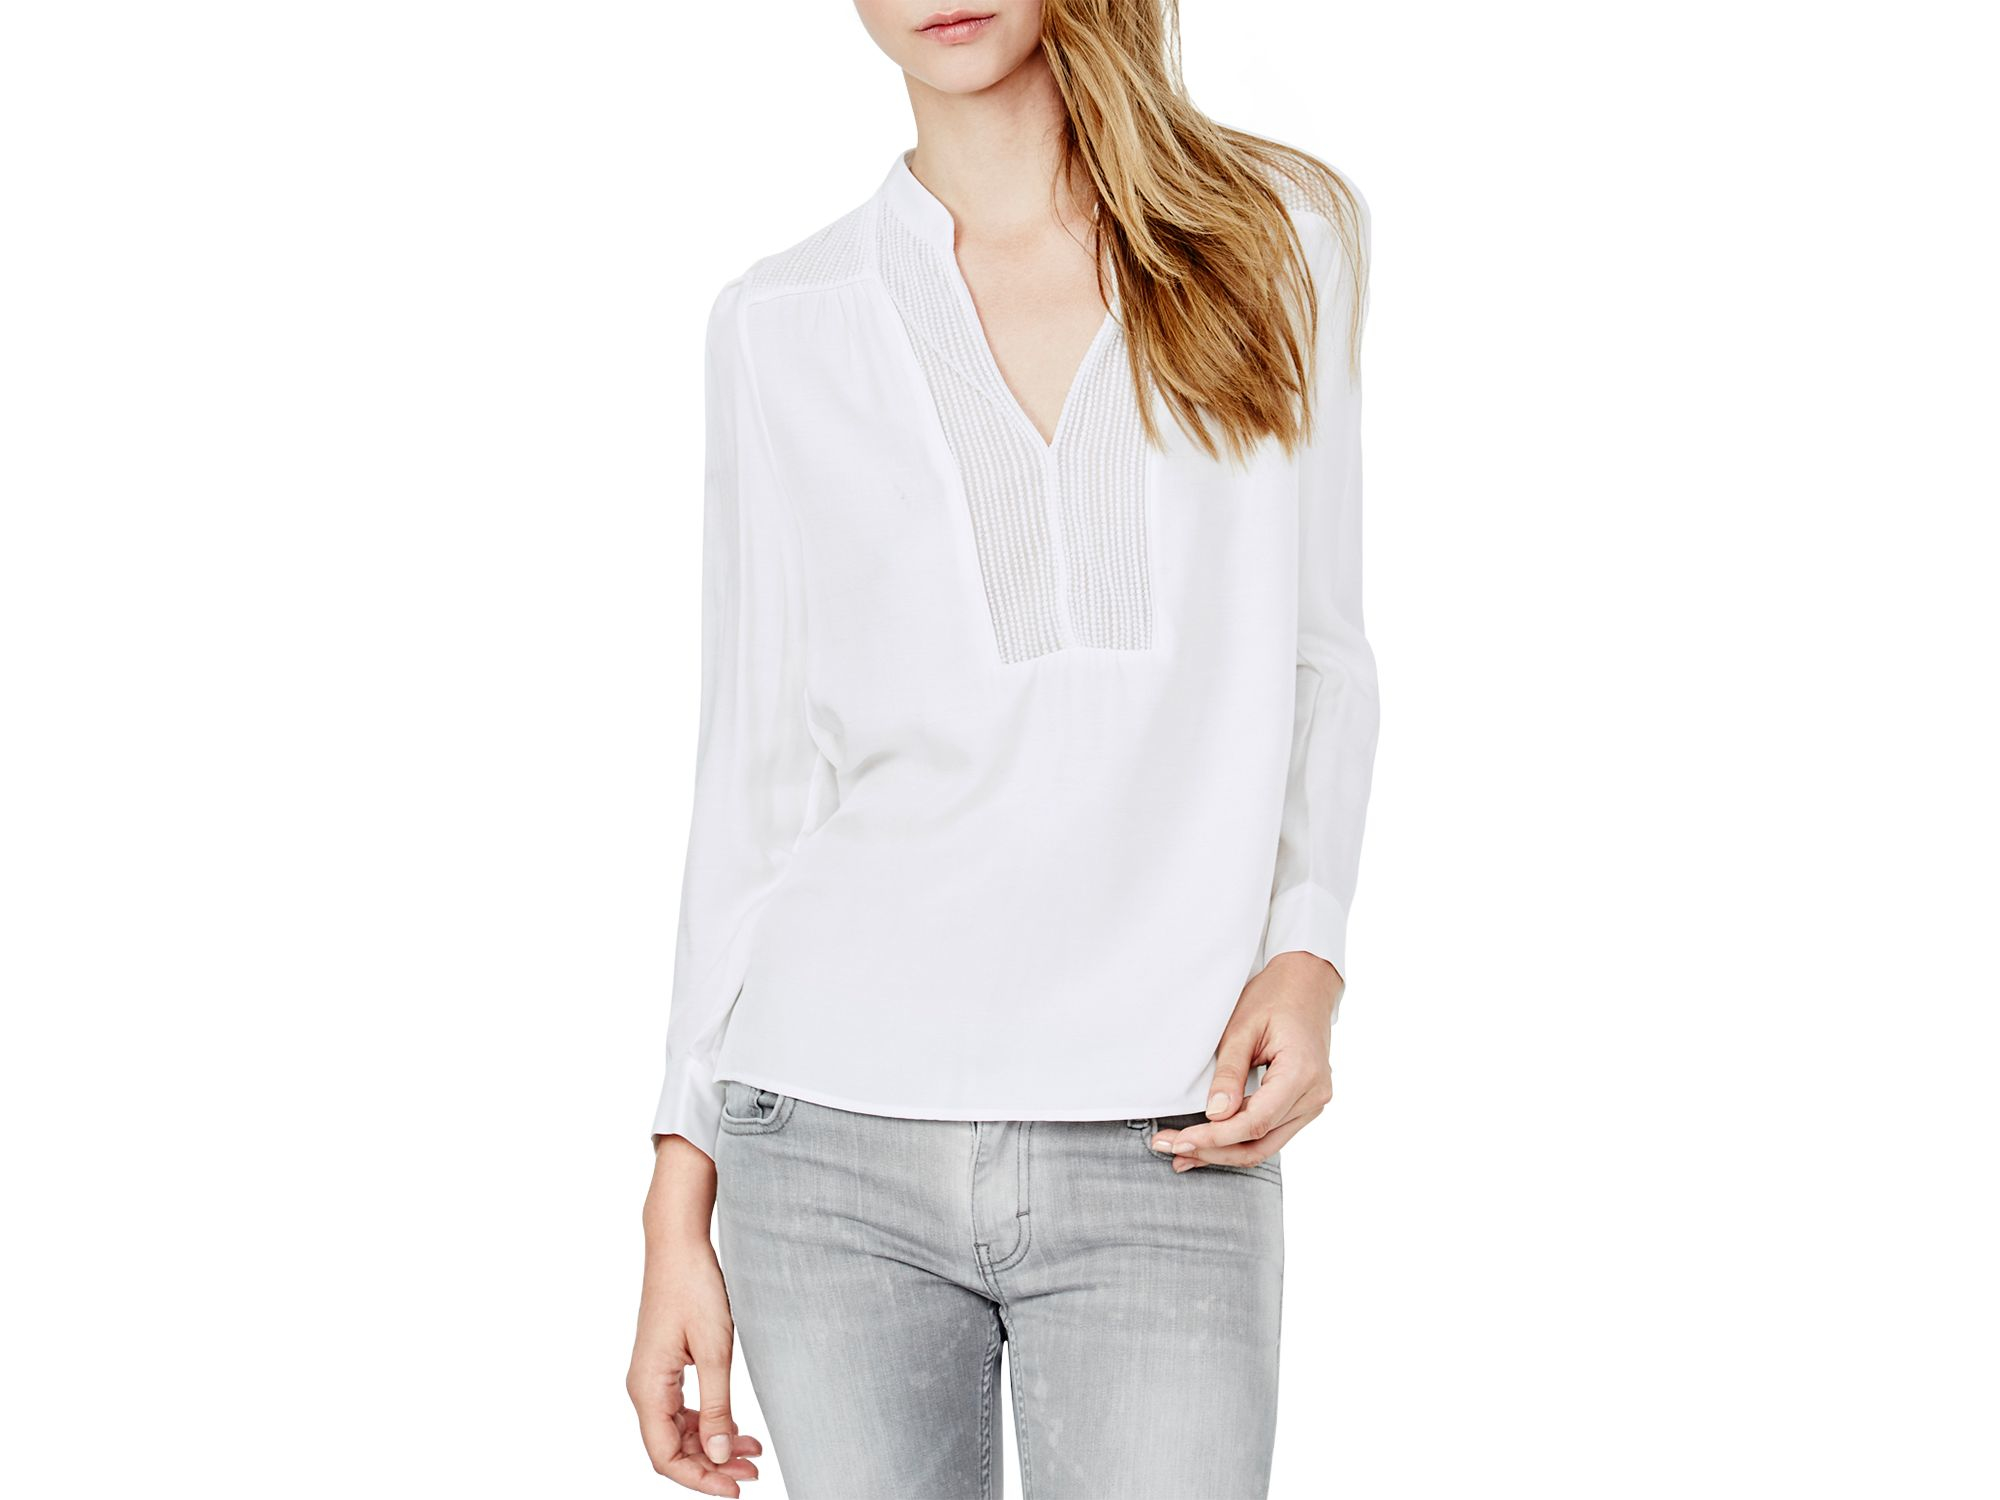 Maje Leopoldin Lace Inset Top in White | Lyst